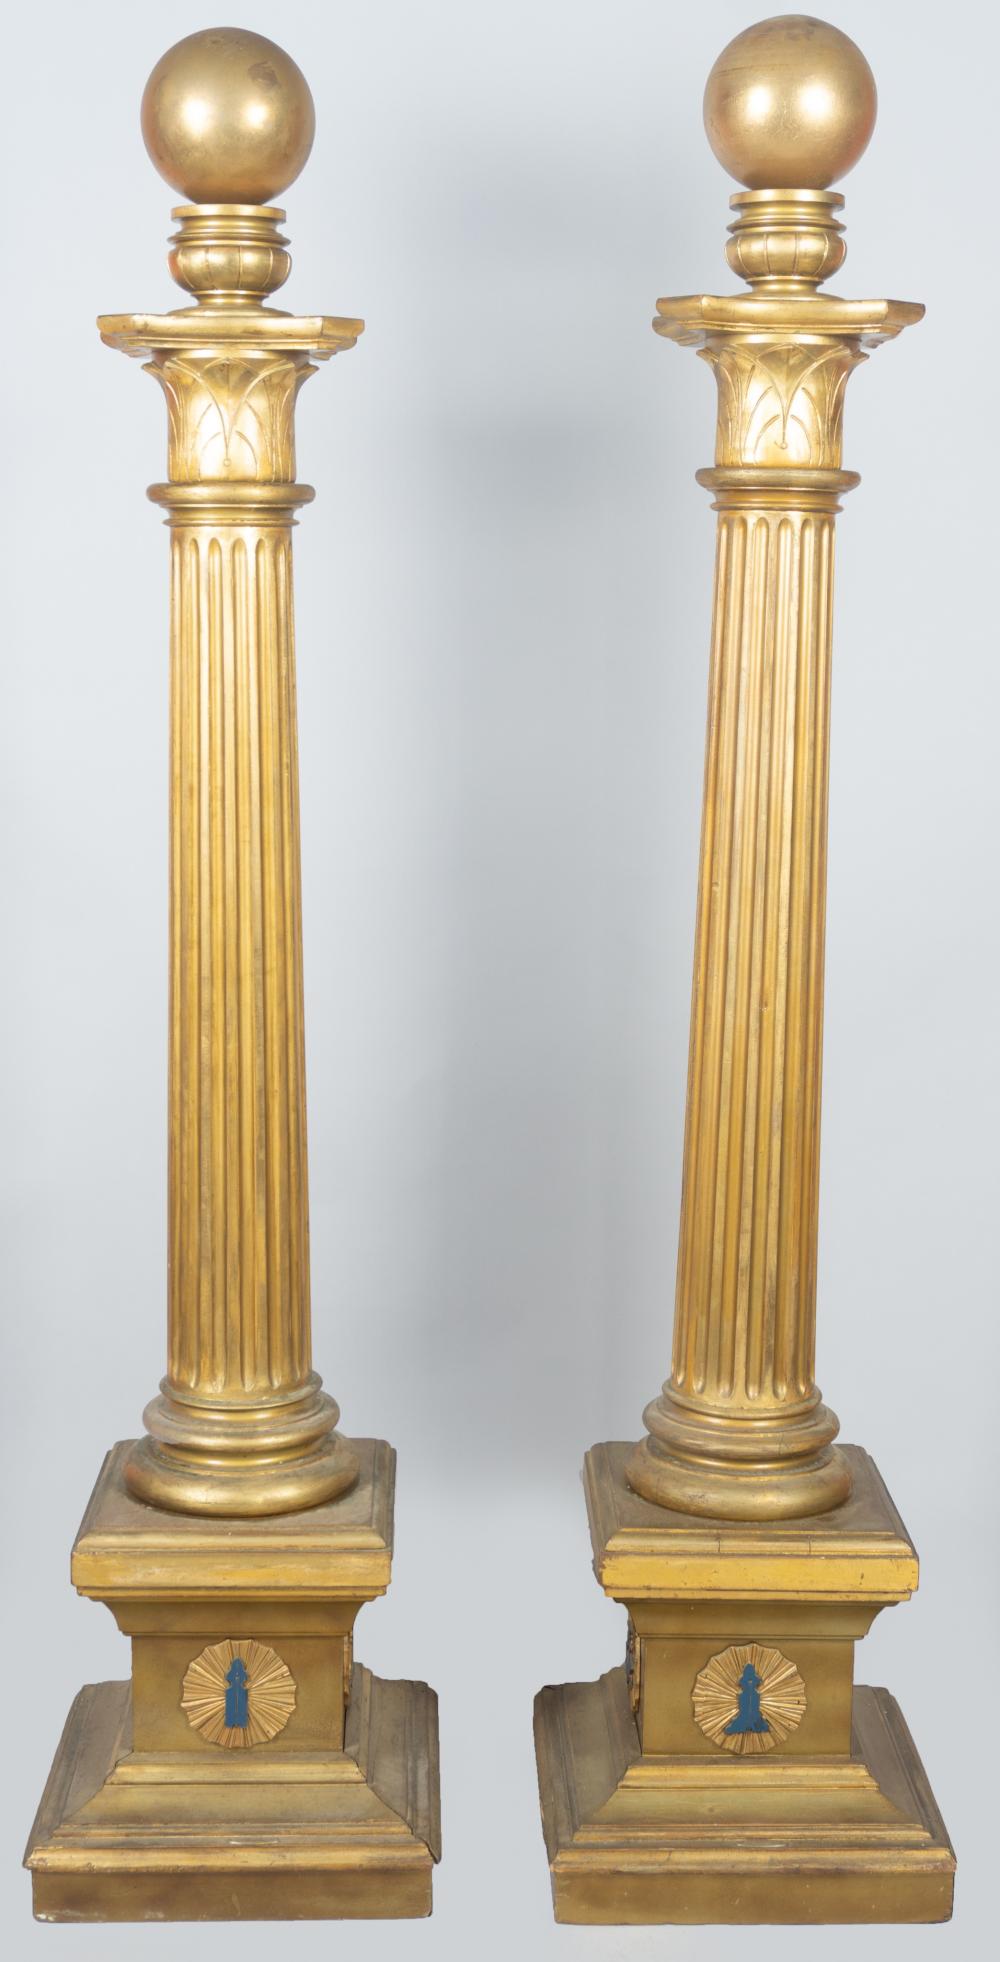 MATCHED PAIR OF CLASSICAL STYLE 33d365